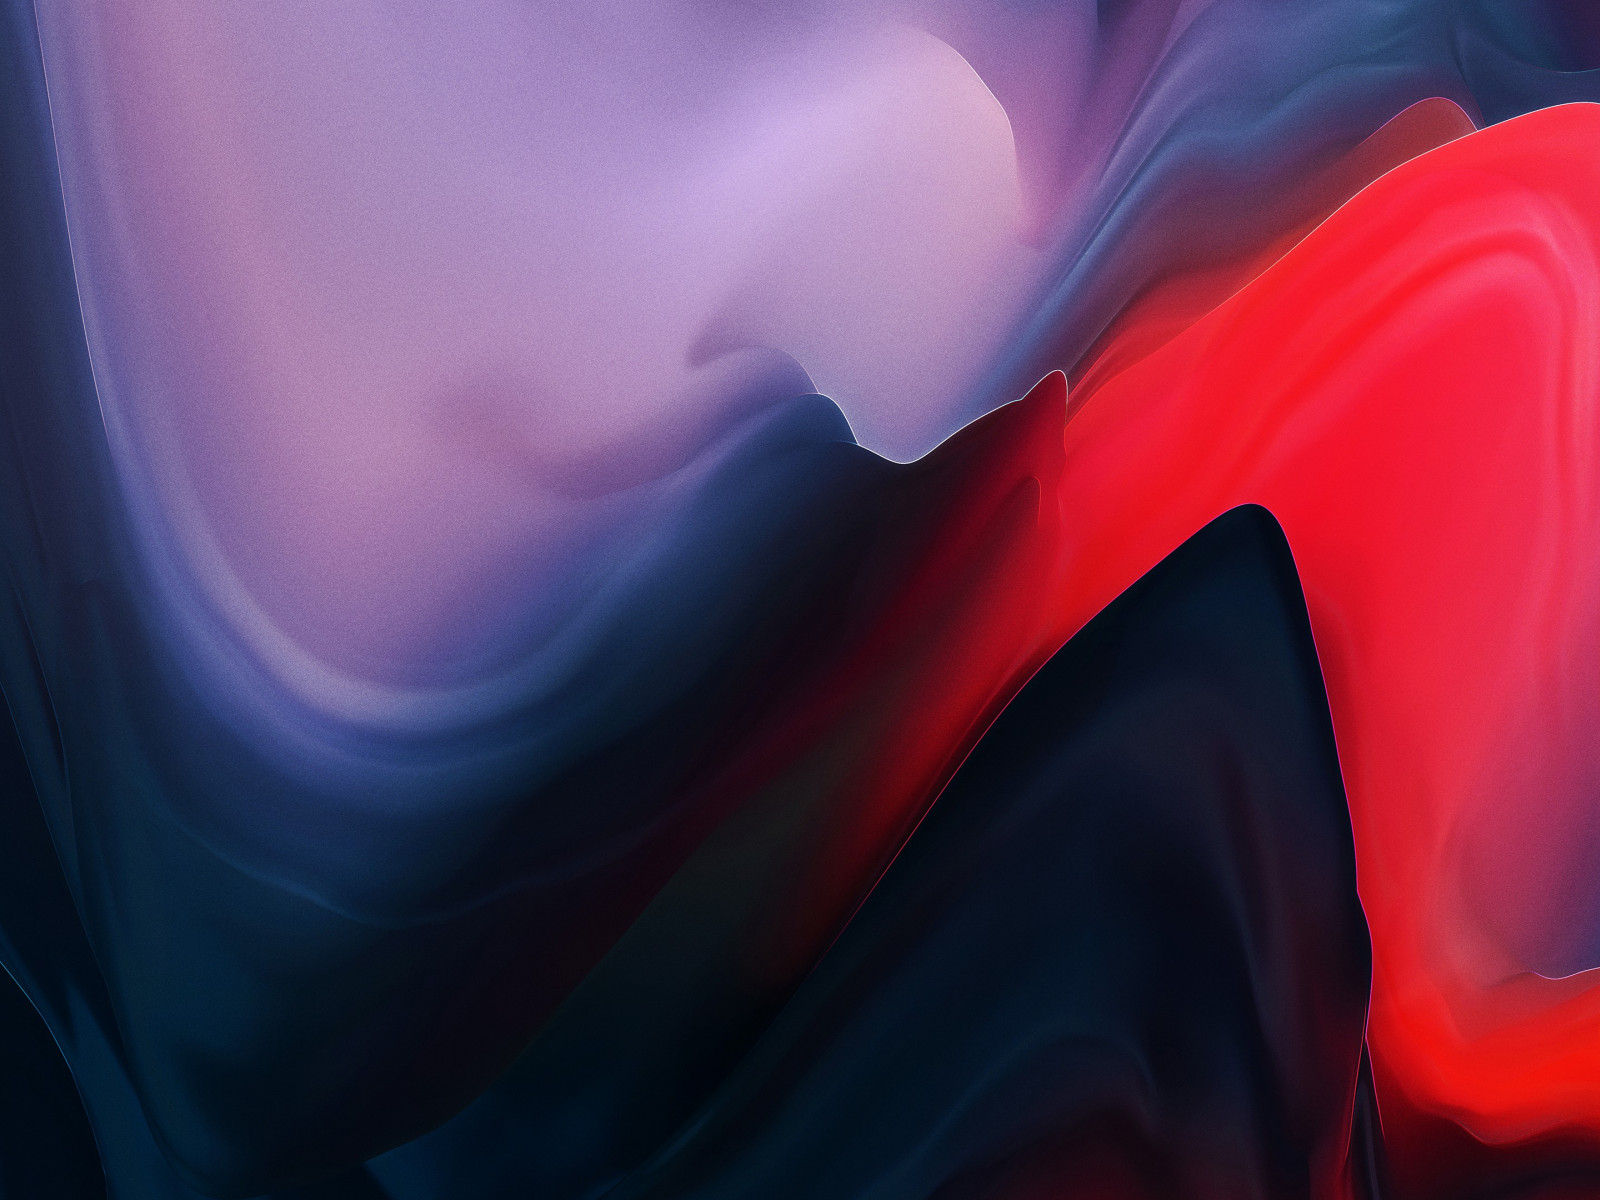 The Abstract from OnePlus 6T wallpaper 1600x1200